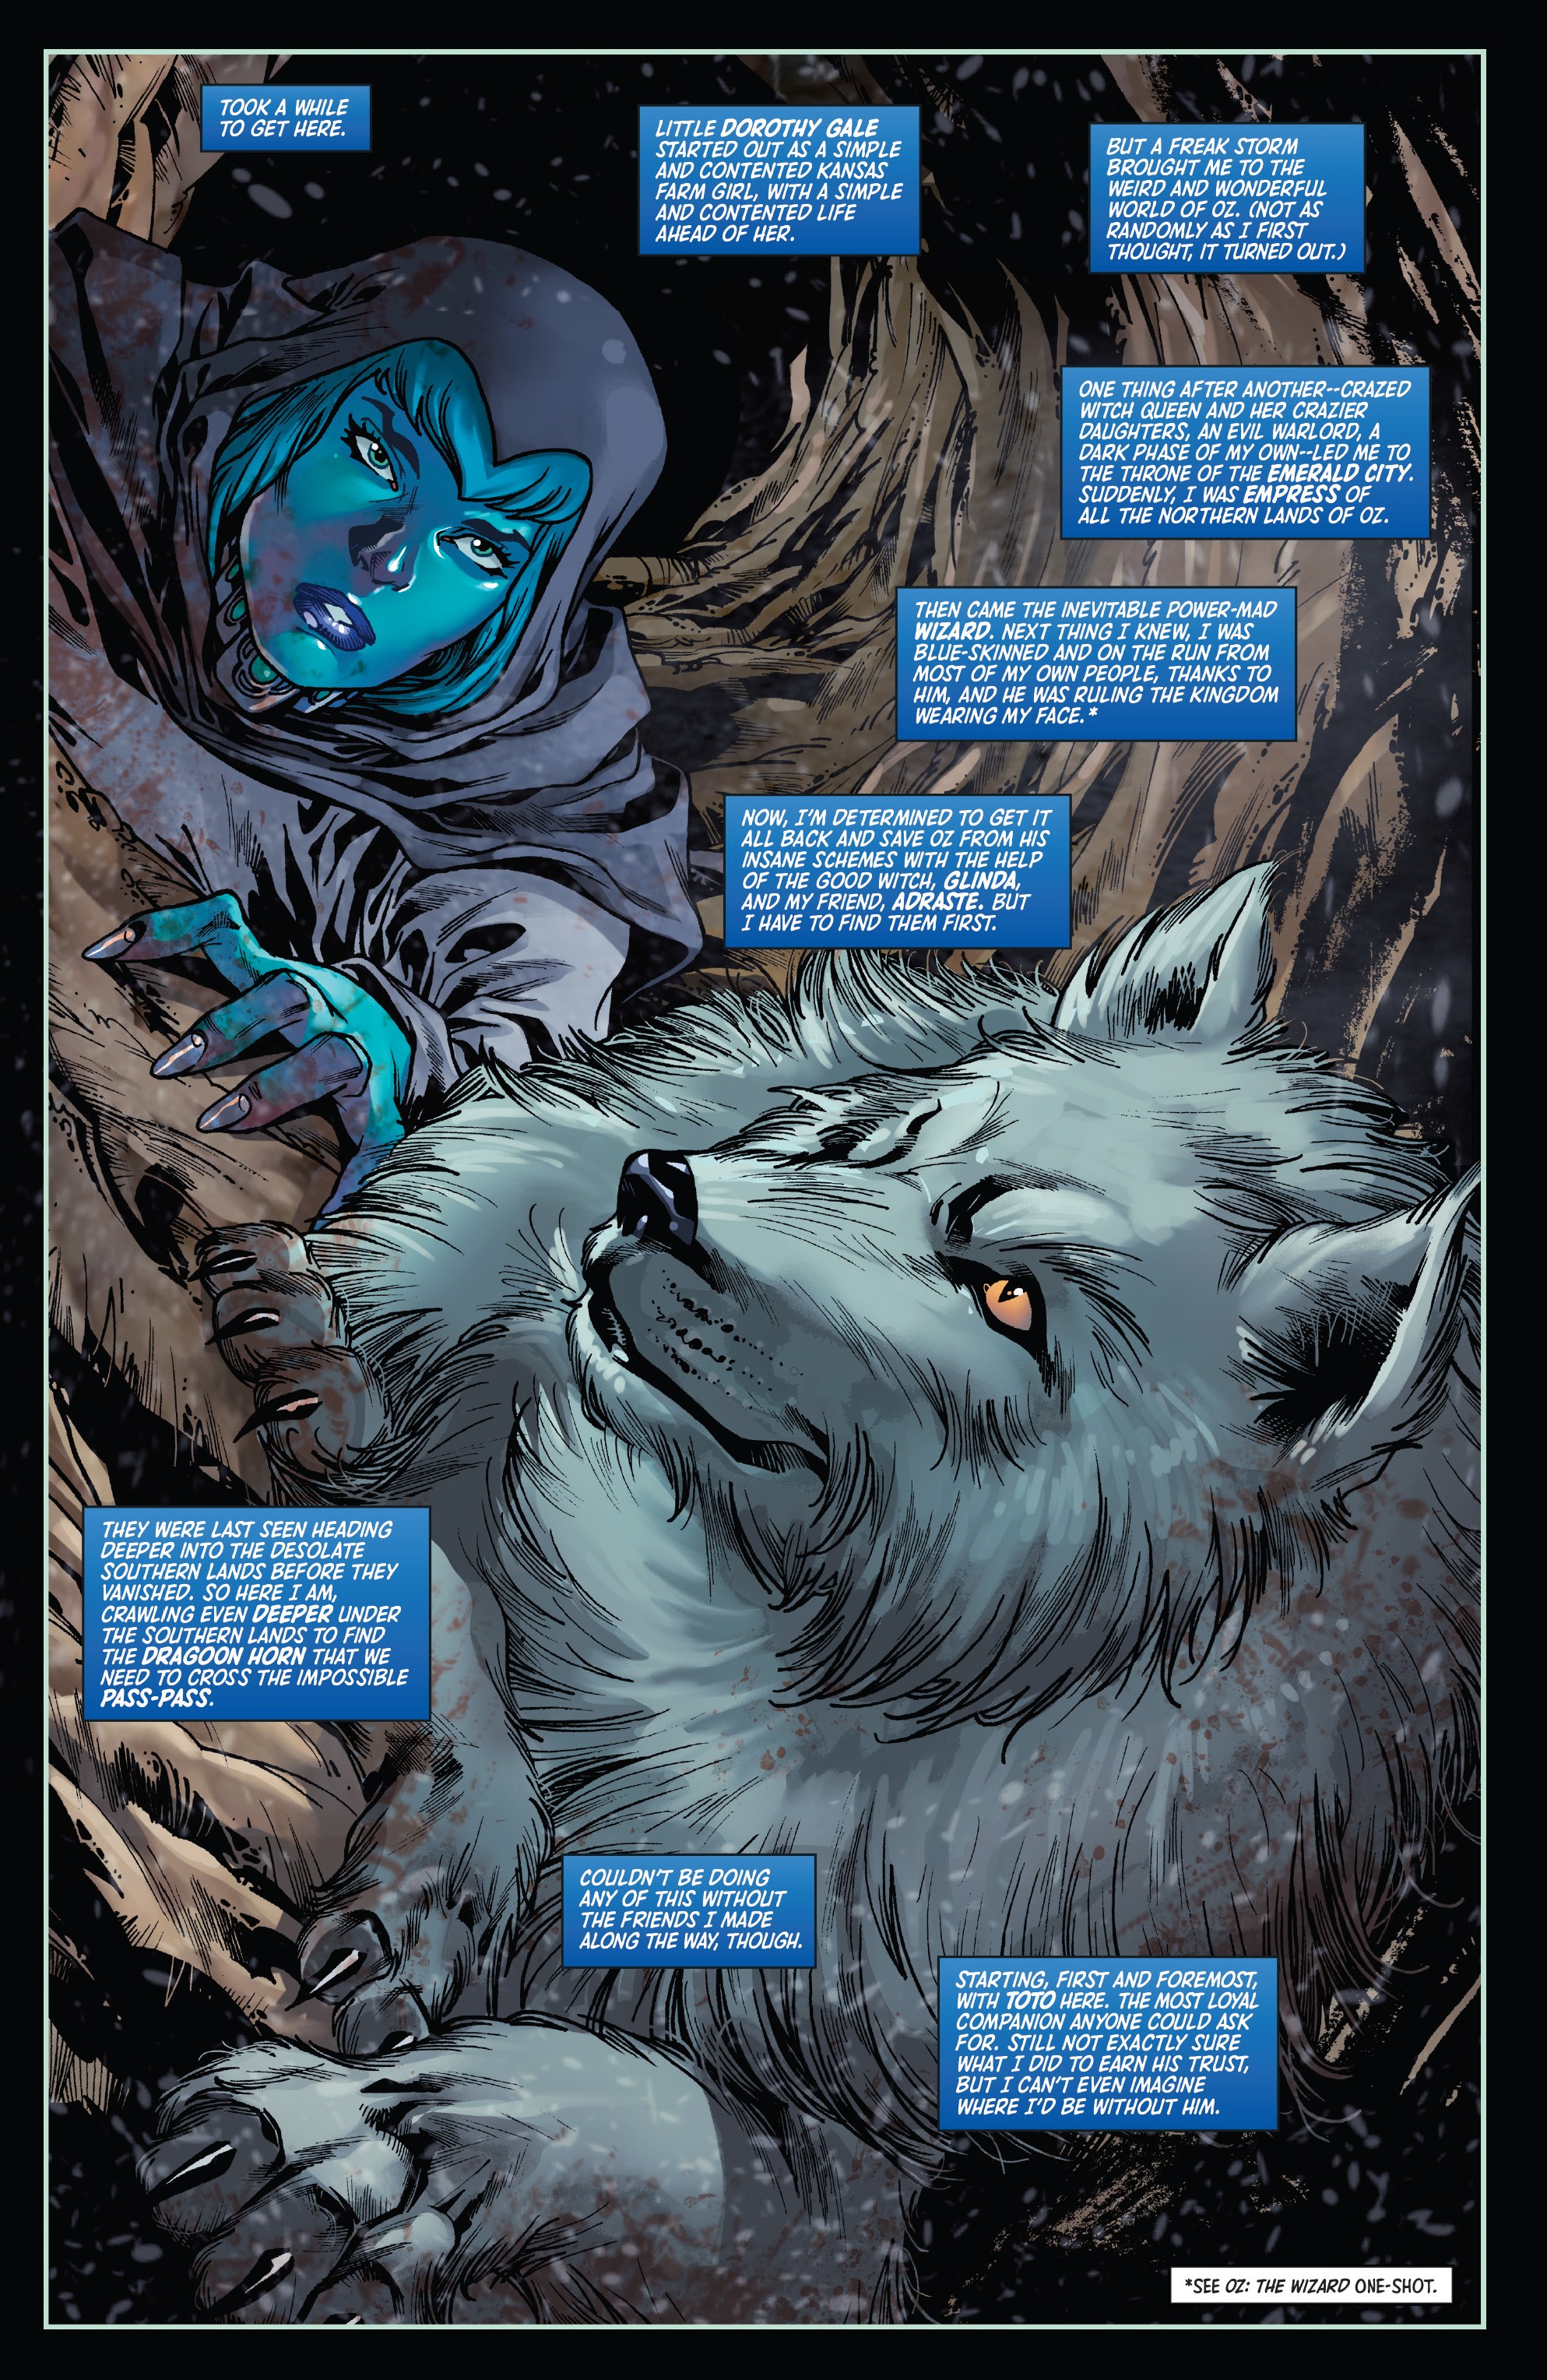 Oz: Heart of Magic (2019-): Chapter 1 - Page 3